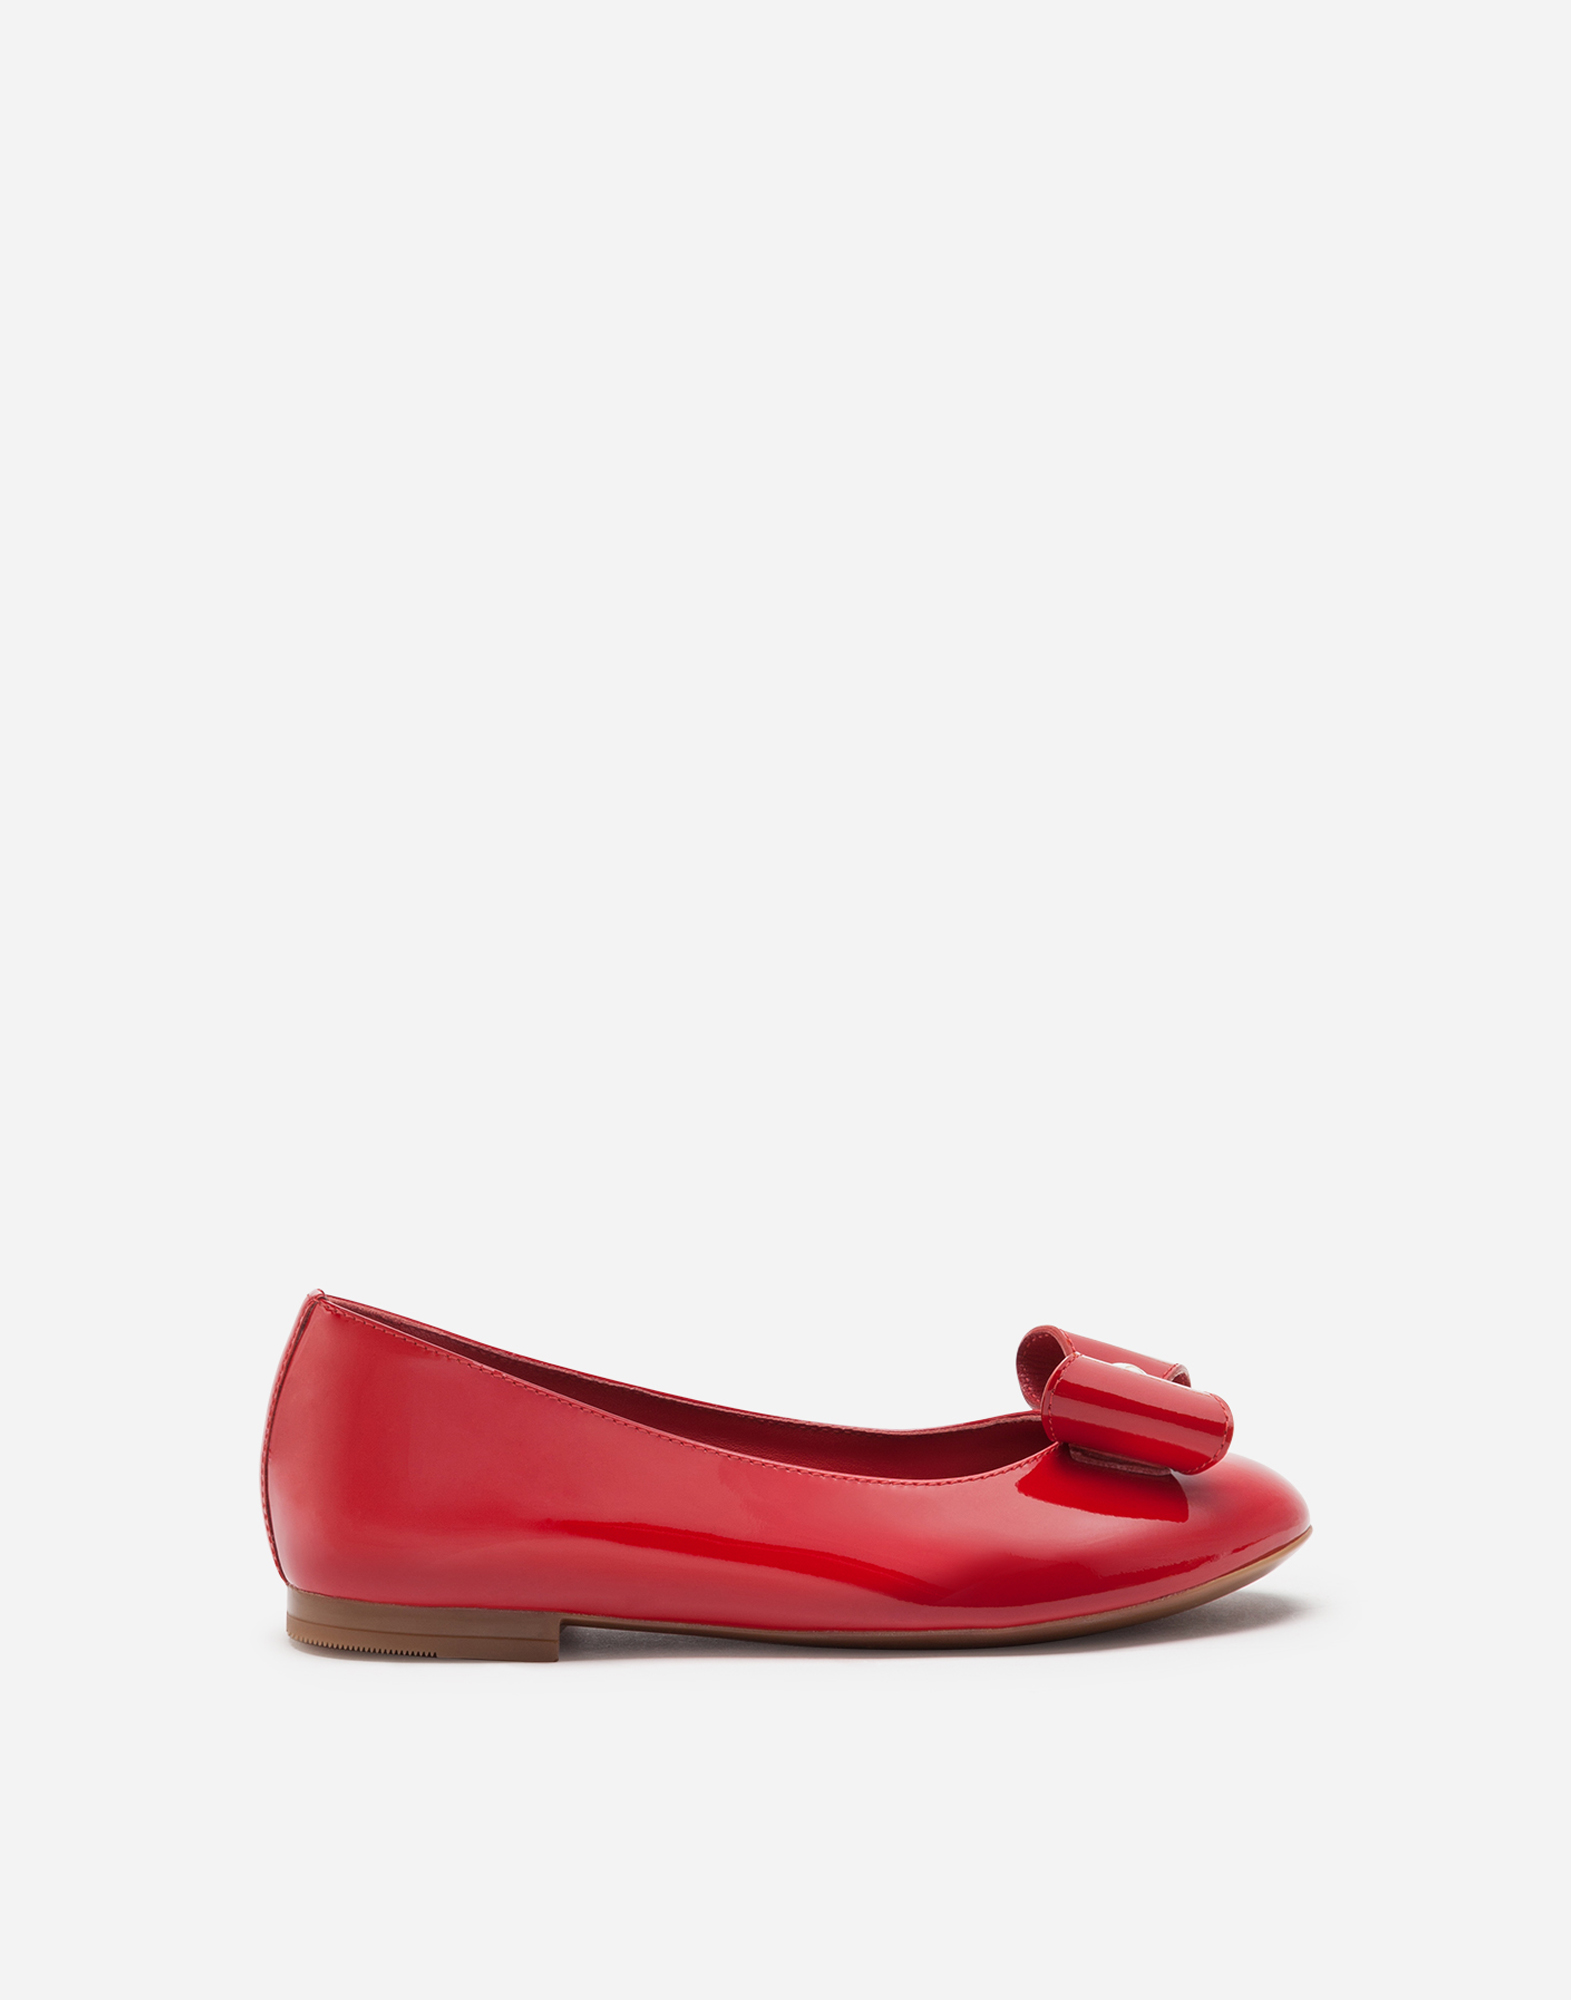 DOLCE & GABBANA PATENT LEATHER BALLERINA SHOES WITH BOW